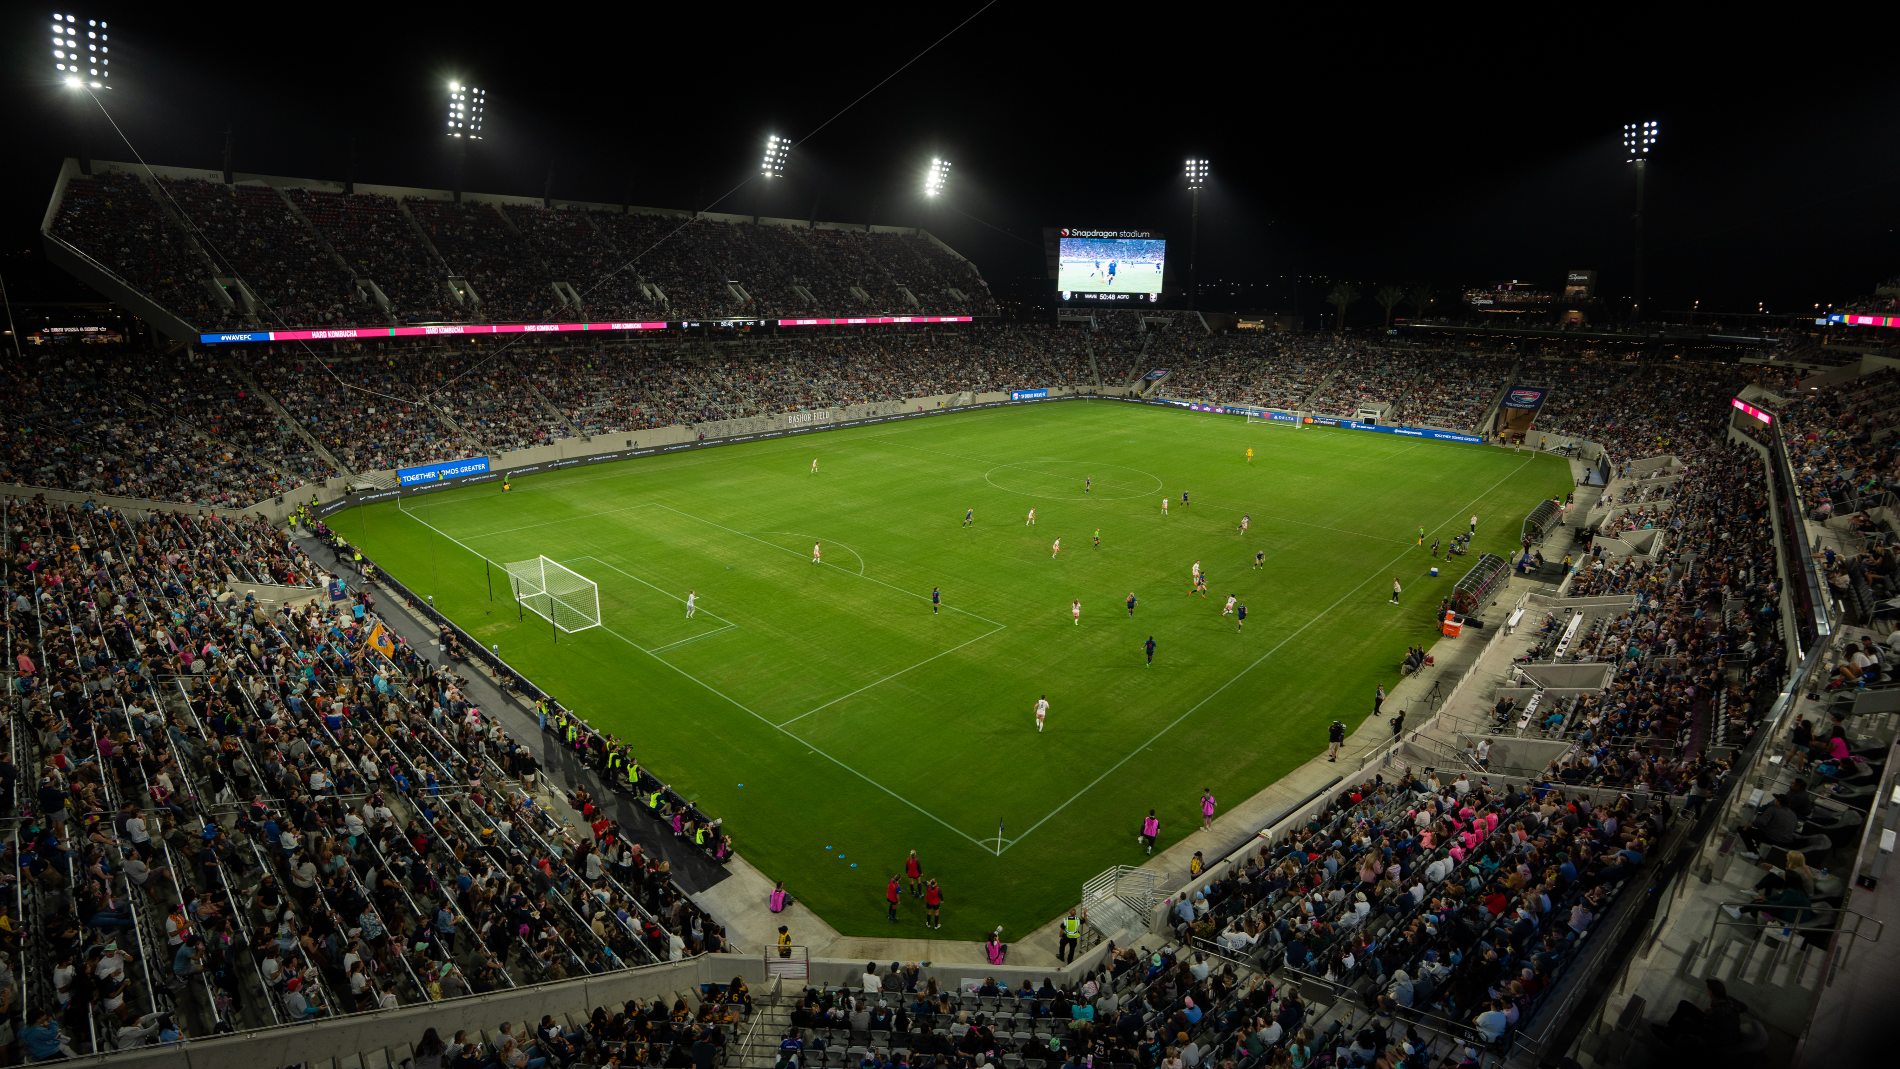 Major League Soccer's San Diego FC will have Snapdragon scheduling priority  over Wave - The San Diego Union-Tribune